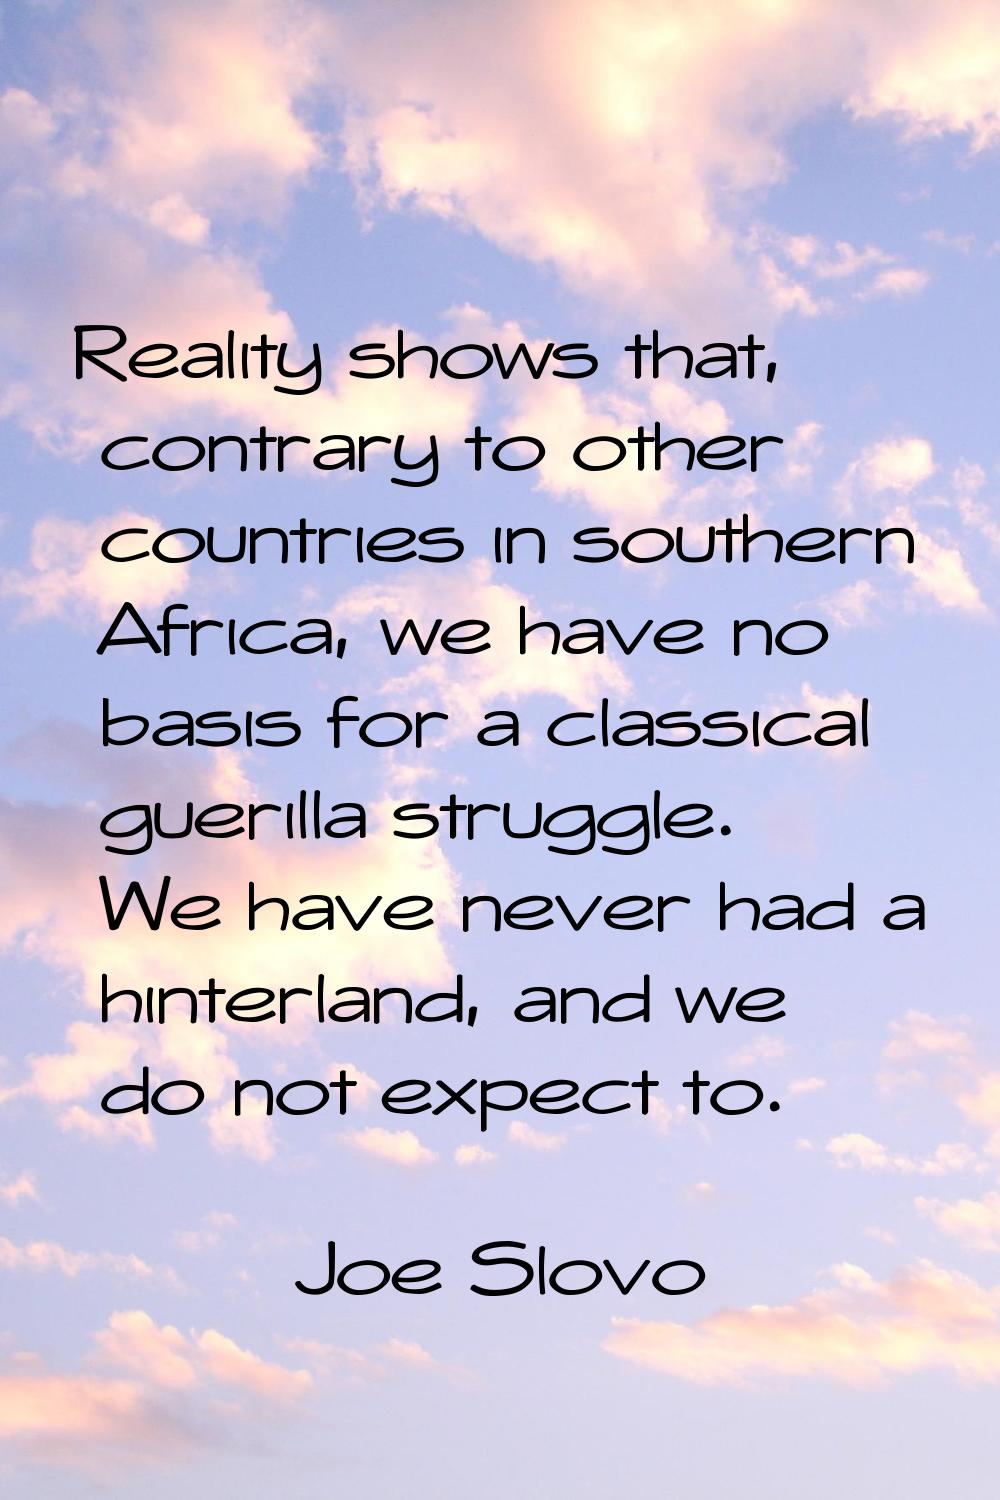 Reality shows that, contrary to other countries in southern Africa, we have no basis for a classica